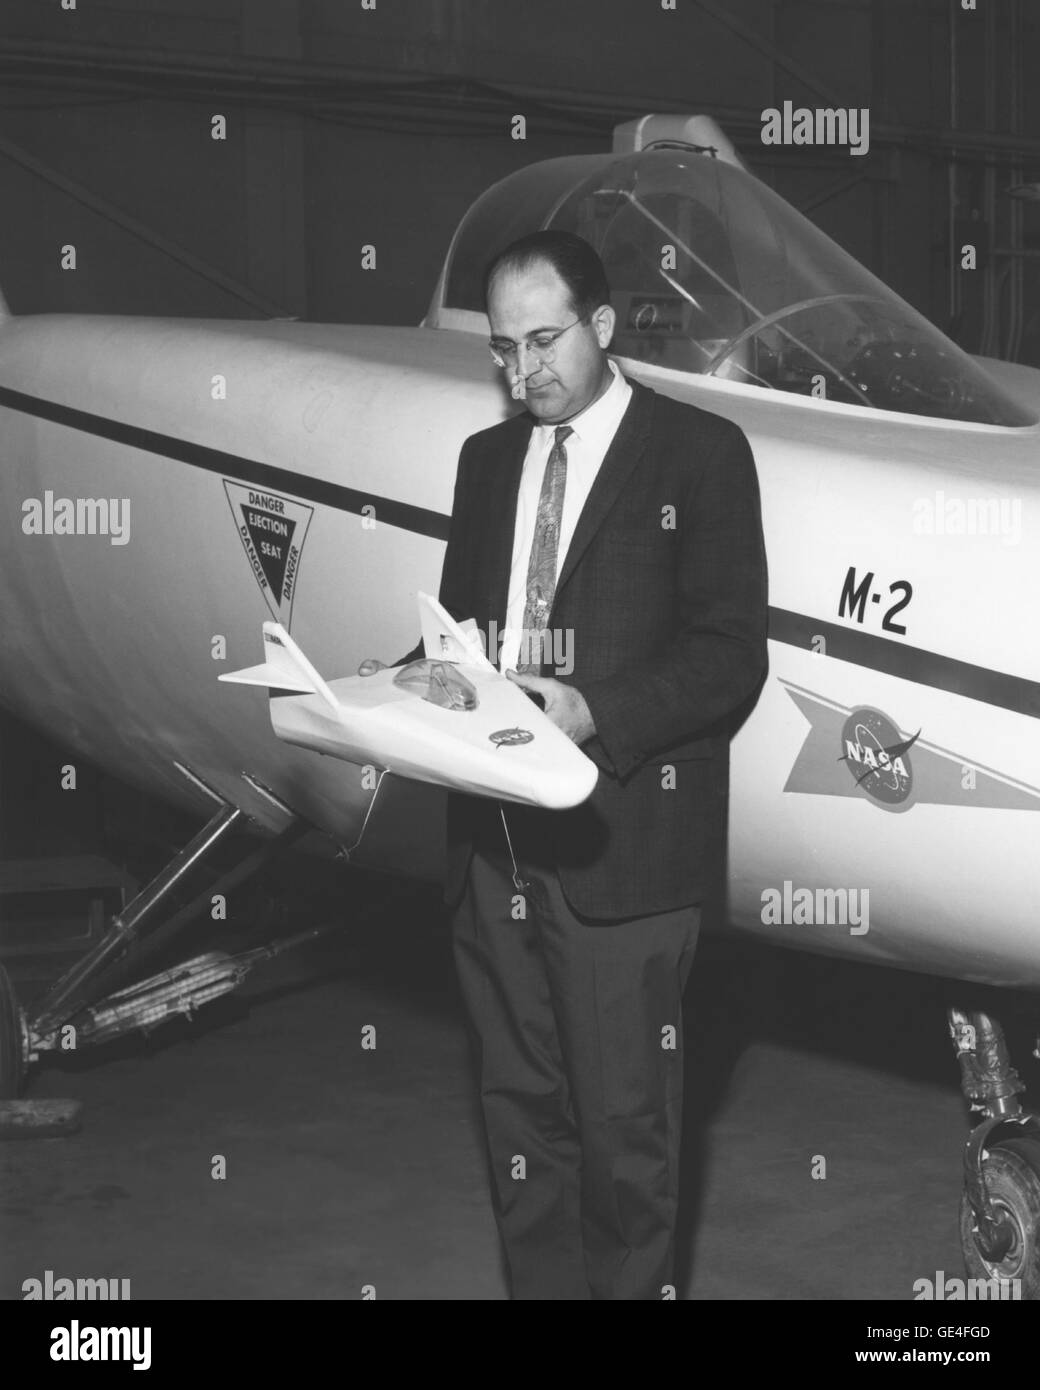 Engineer Dale Reed holds a model of the M2-F1 Lifting Body aircraft with the full scale version directly behind him. In support of the M2 lifting body program in the early 1960s, Dale Reed had built a number of small lifting body shapes and drop tested them from a radio controlled mothership.   Image # : E-16475 Date: March 6, 1967 Stock Photo